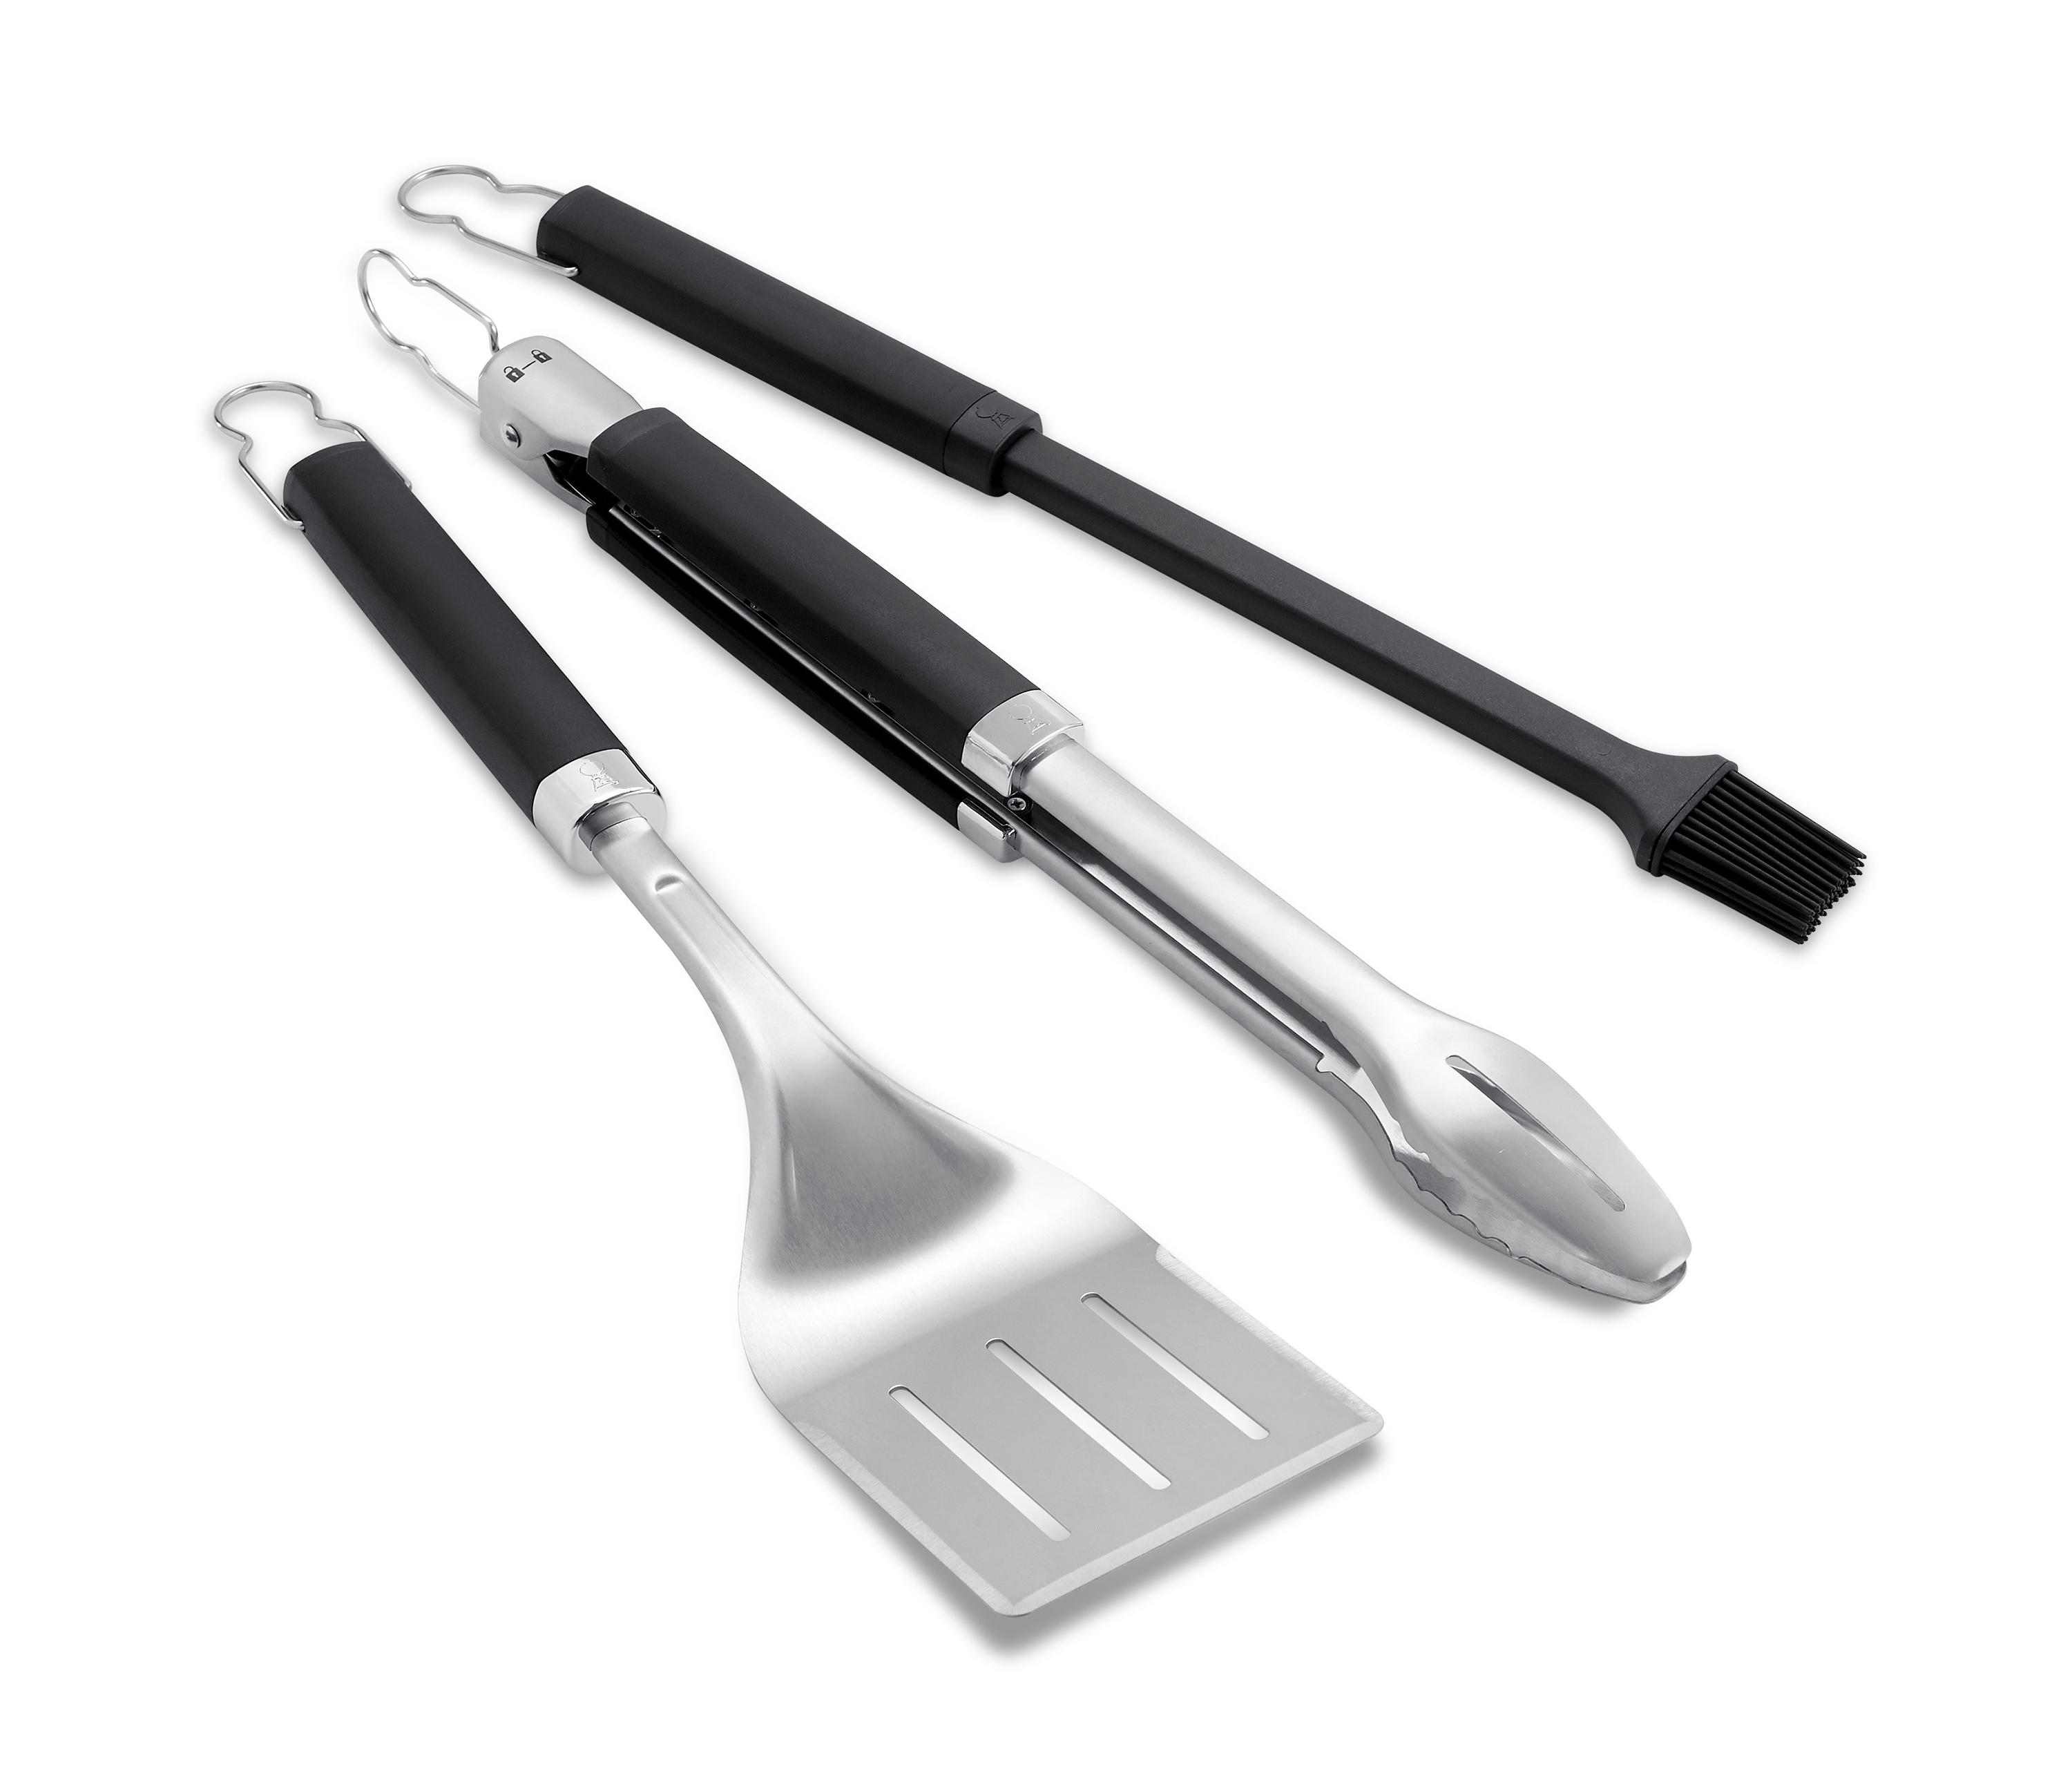 Grill Tools Set - Bbq Grill Utensils - Barbecue Grill Accessories With –  Outlery